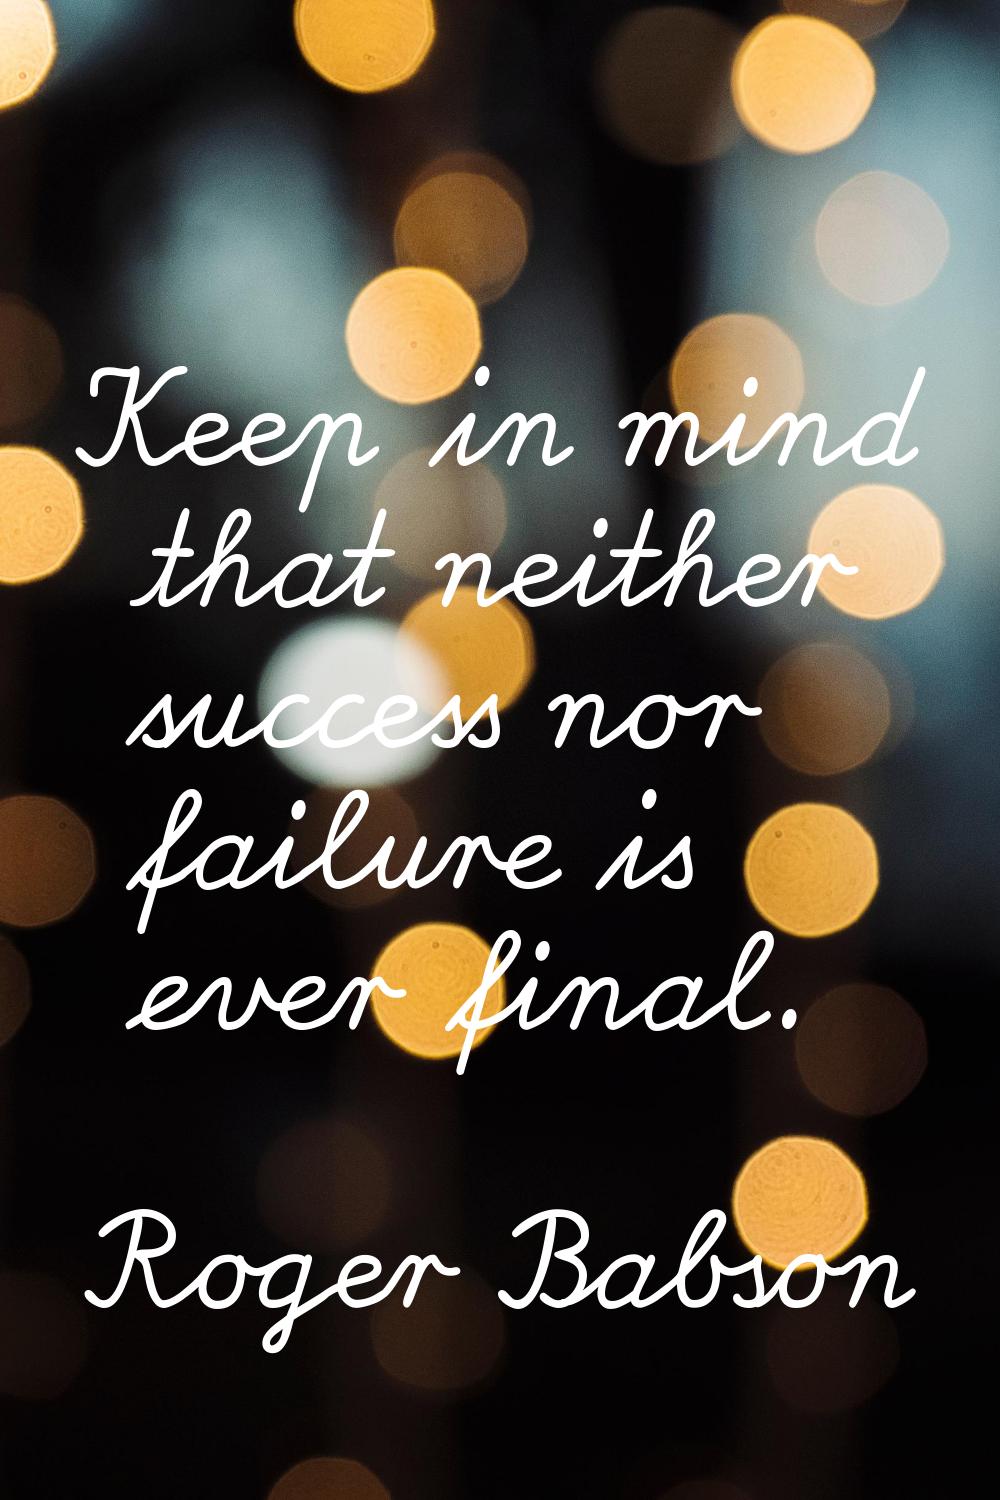 Keep in mind that neither success nor failure is ever final.